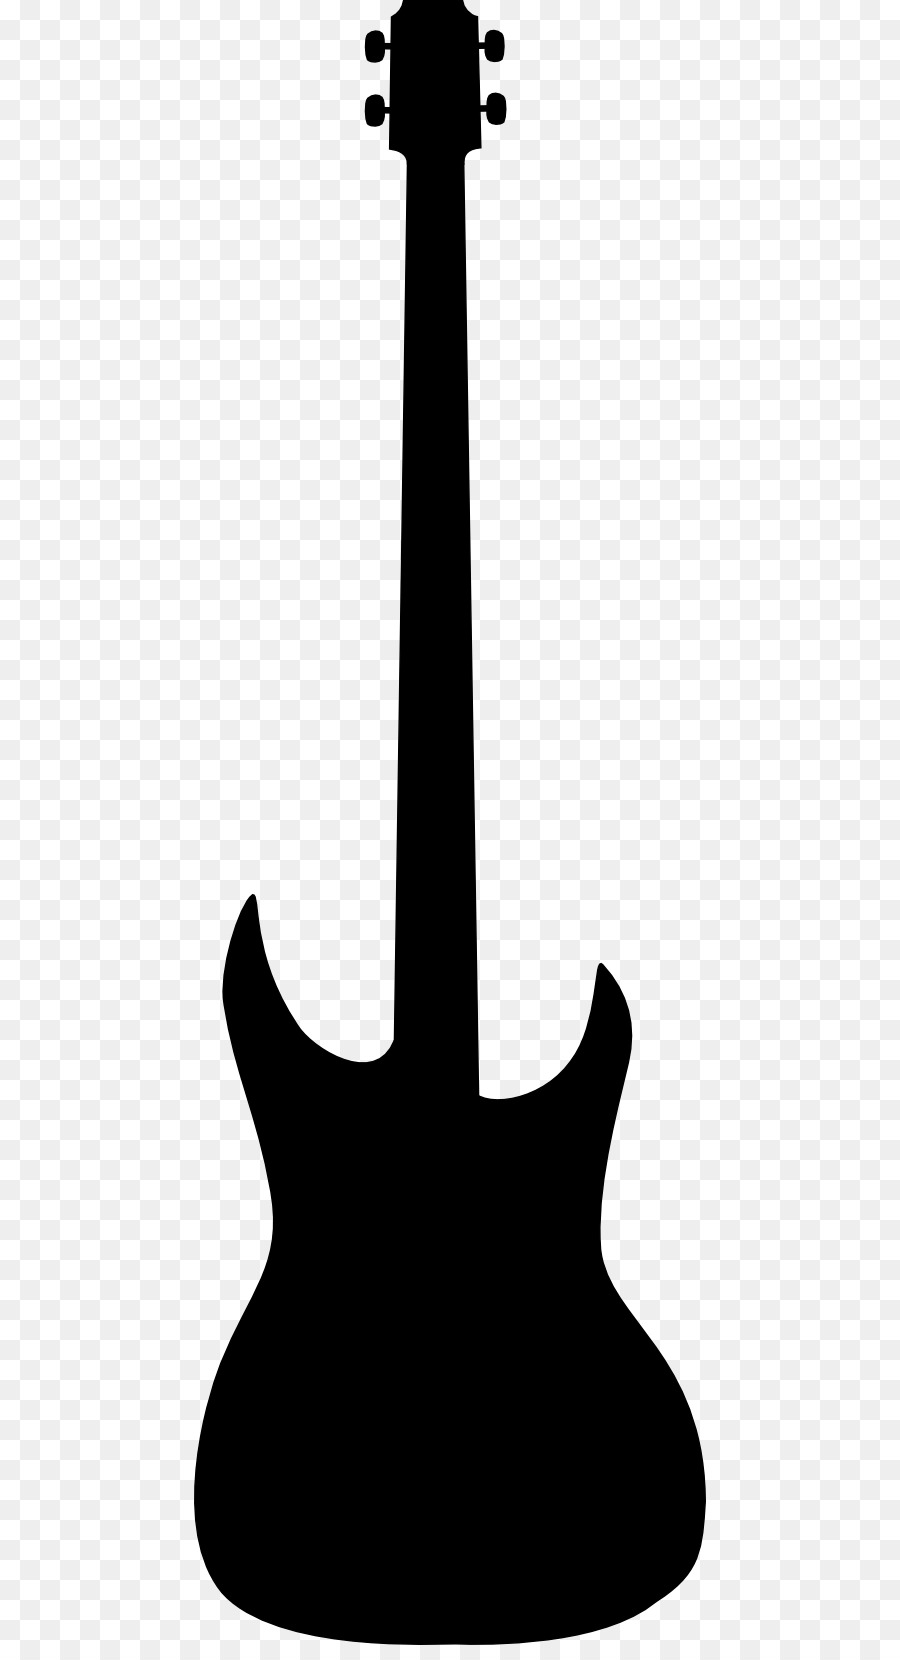 Free Guitar Silhouette Png, Download Free Guitar Silhouette Png png ...